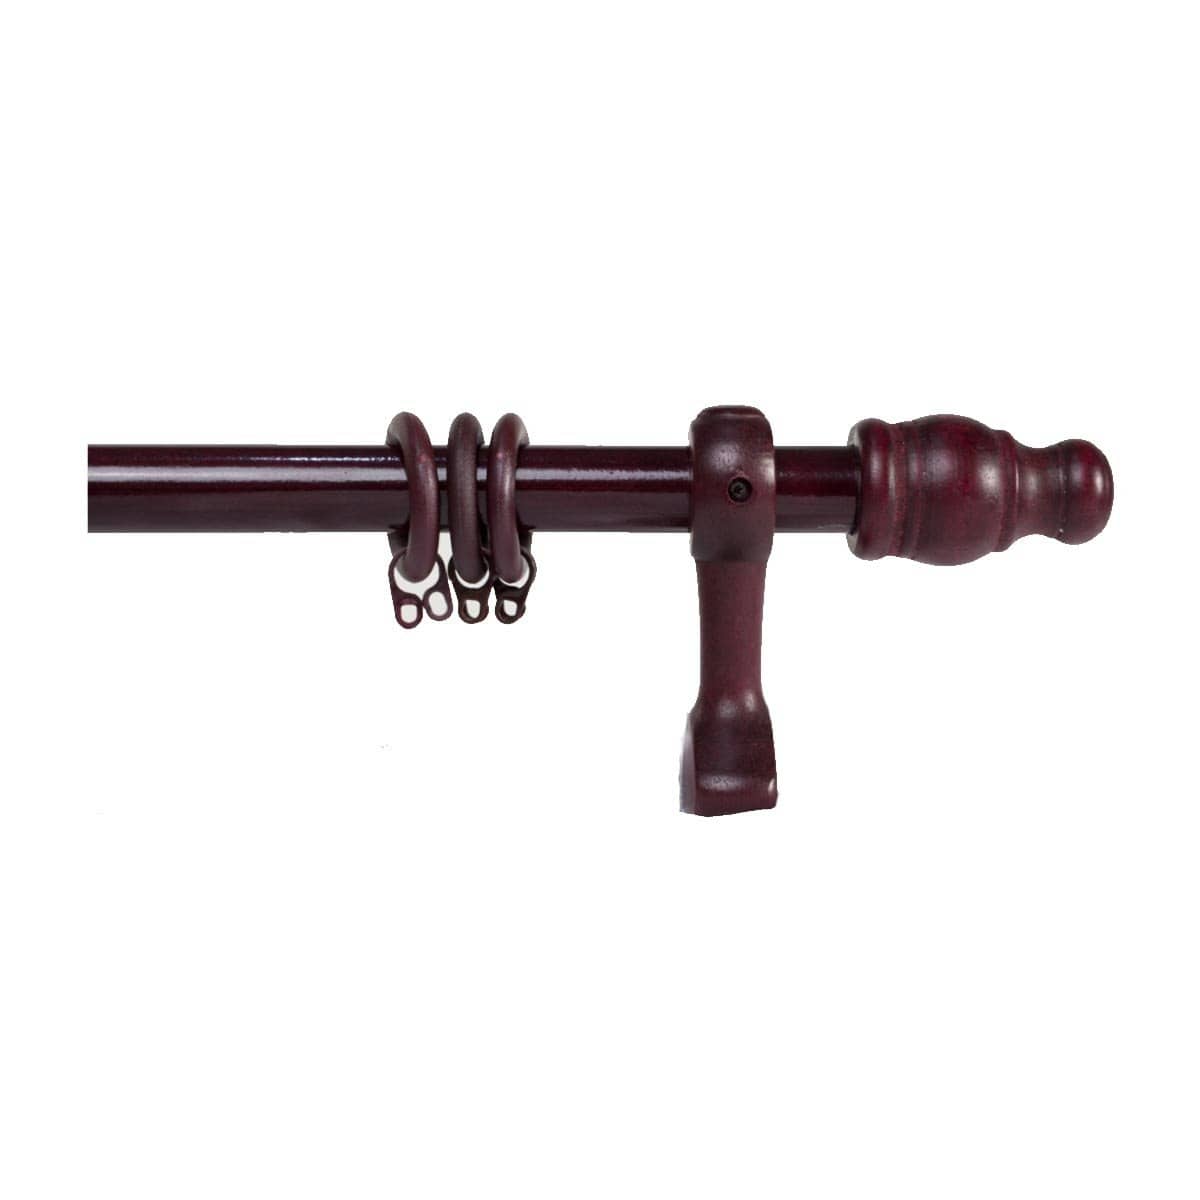 FWCR536 Wooden Curtain Rod 7' Rosewood